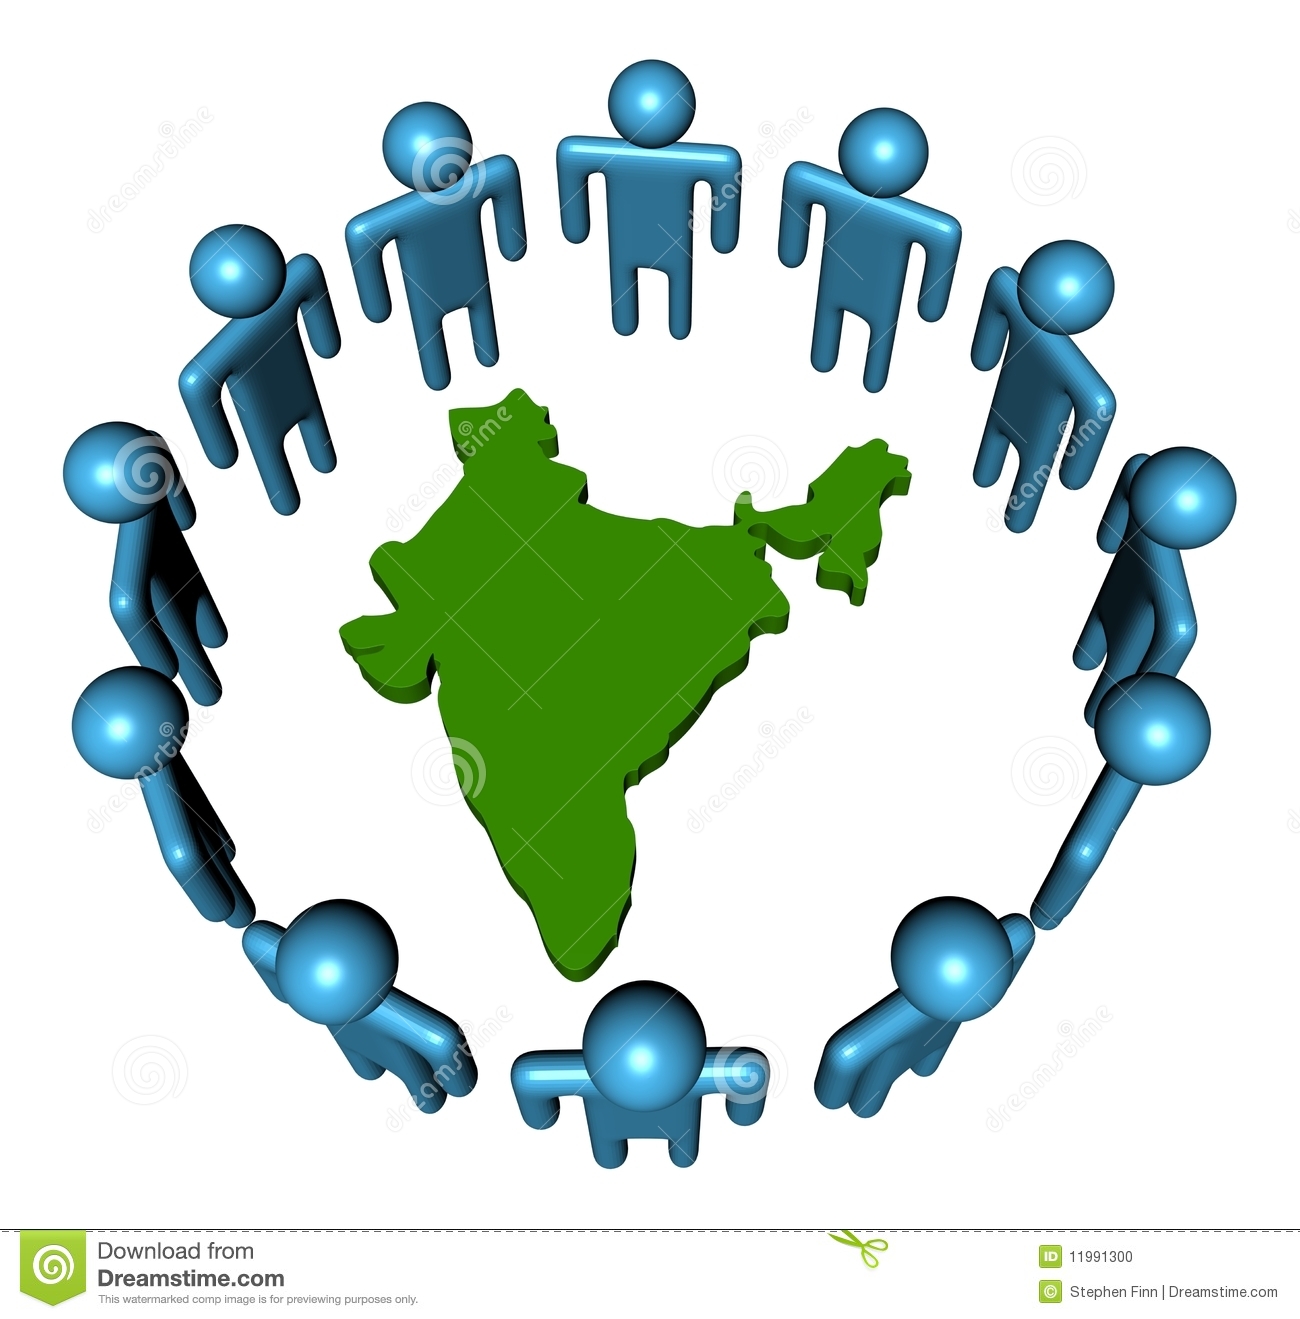 More Similar Stock Images Of   Circle Of People And India Map  